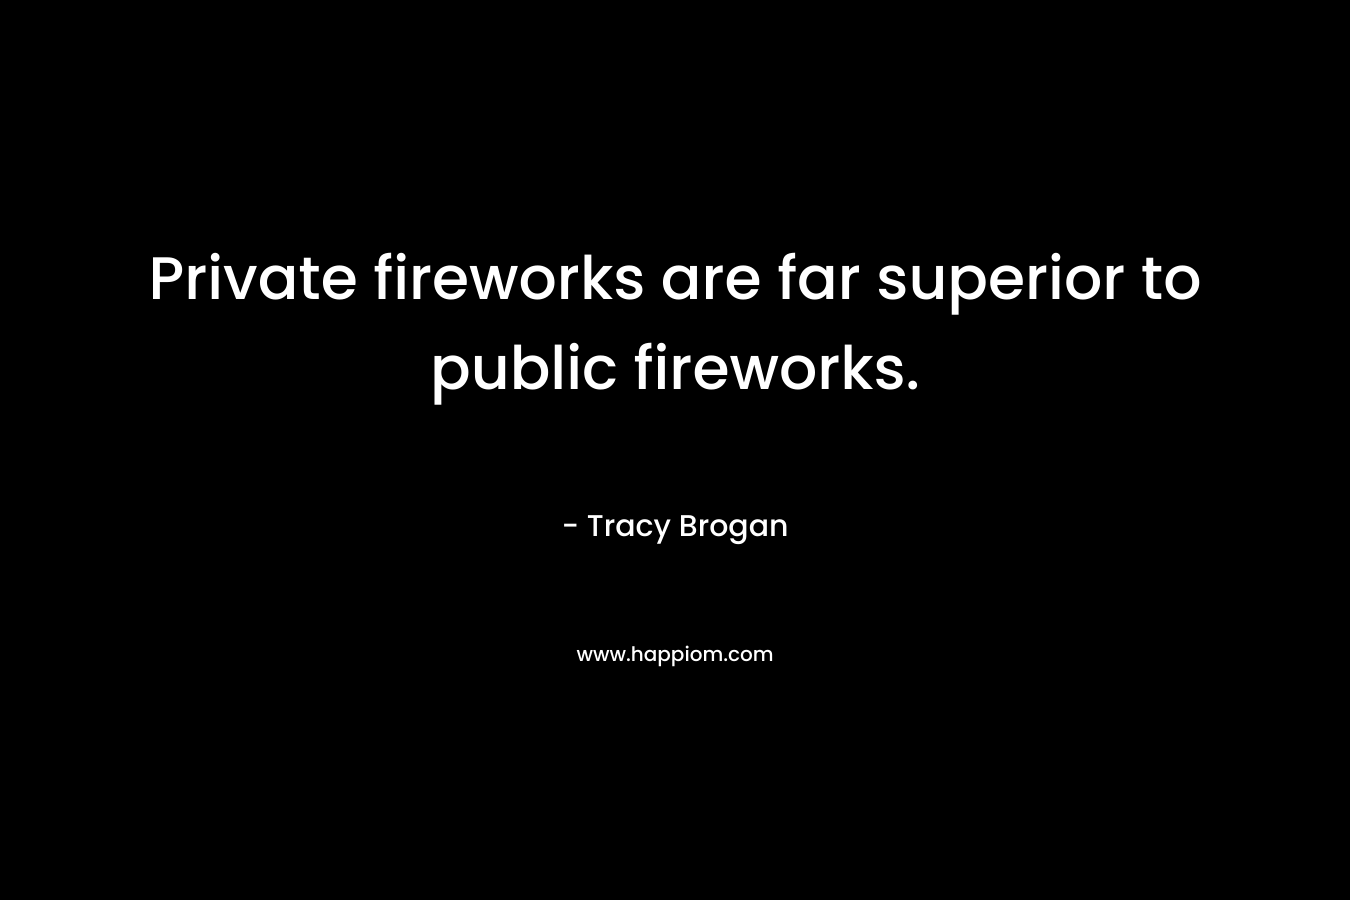 Private fireworks are far superior to public fireworks.